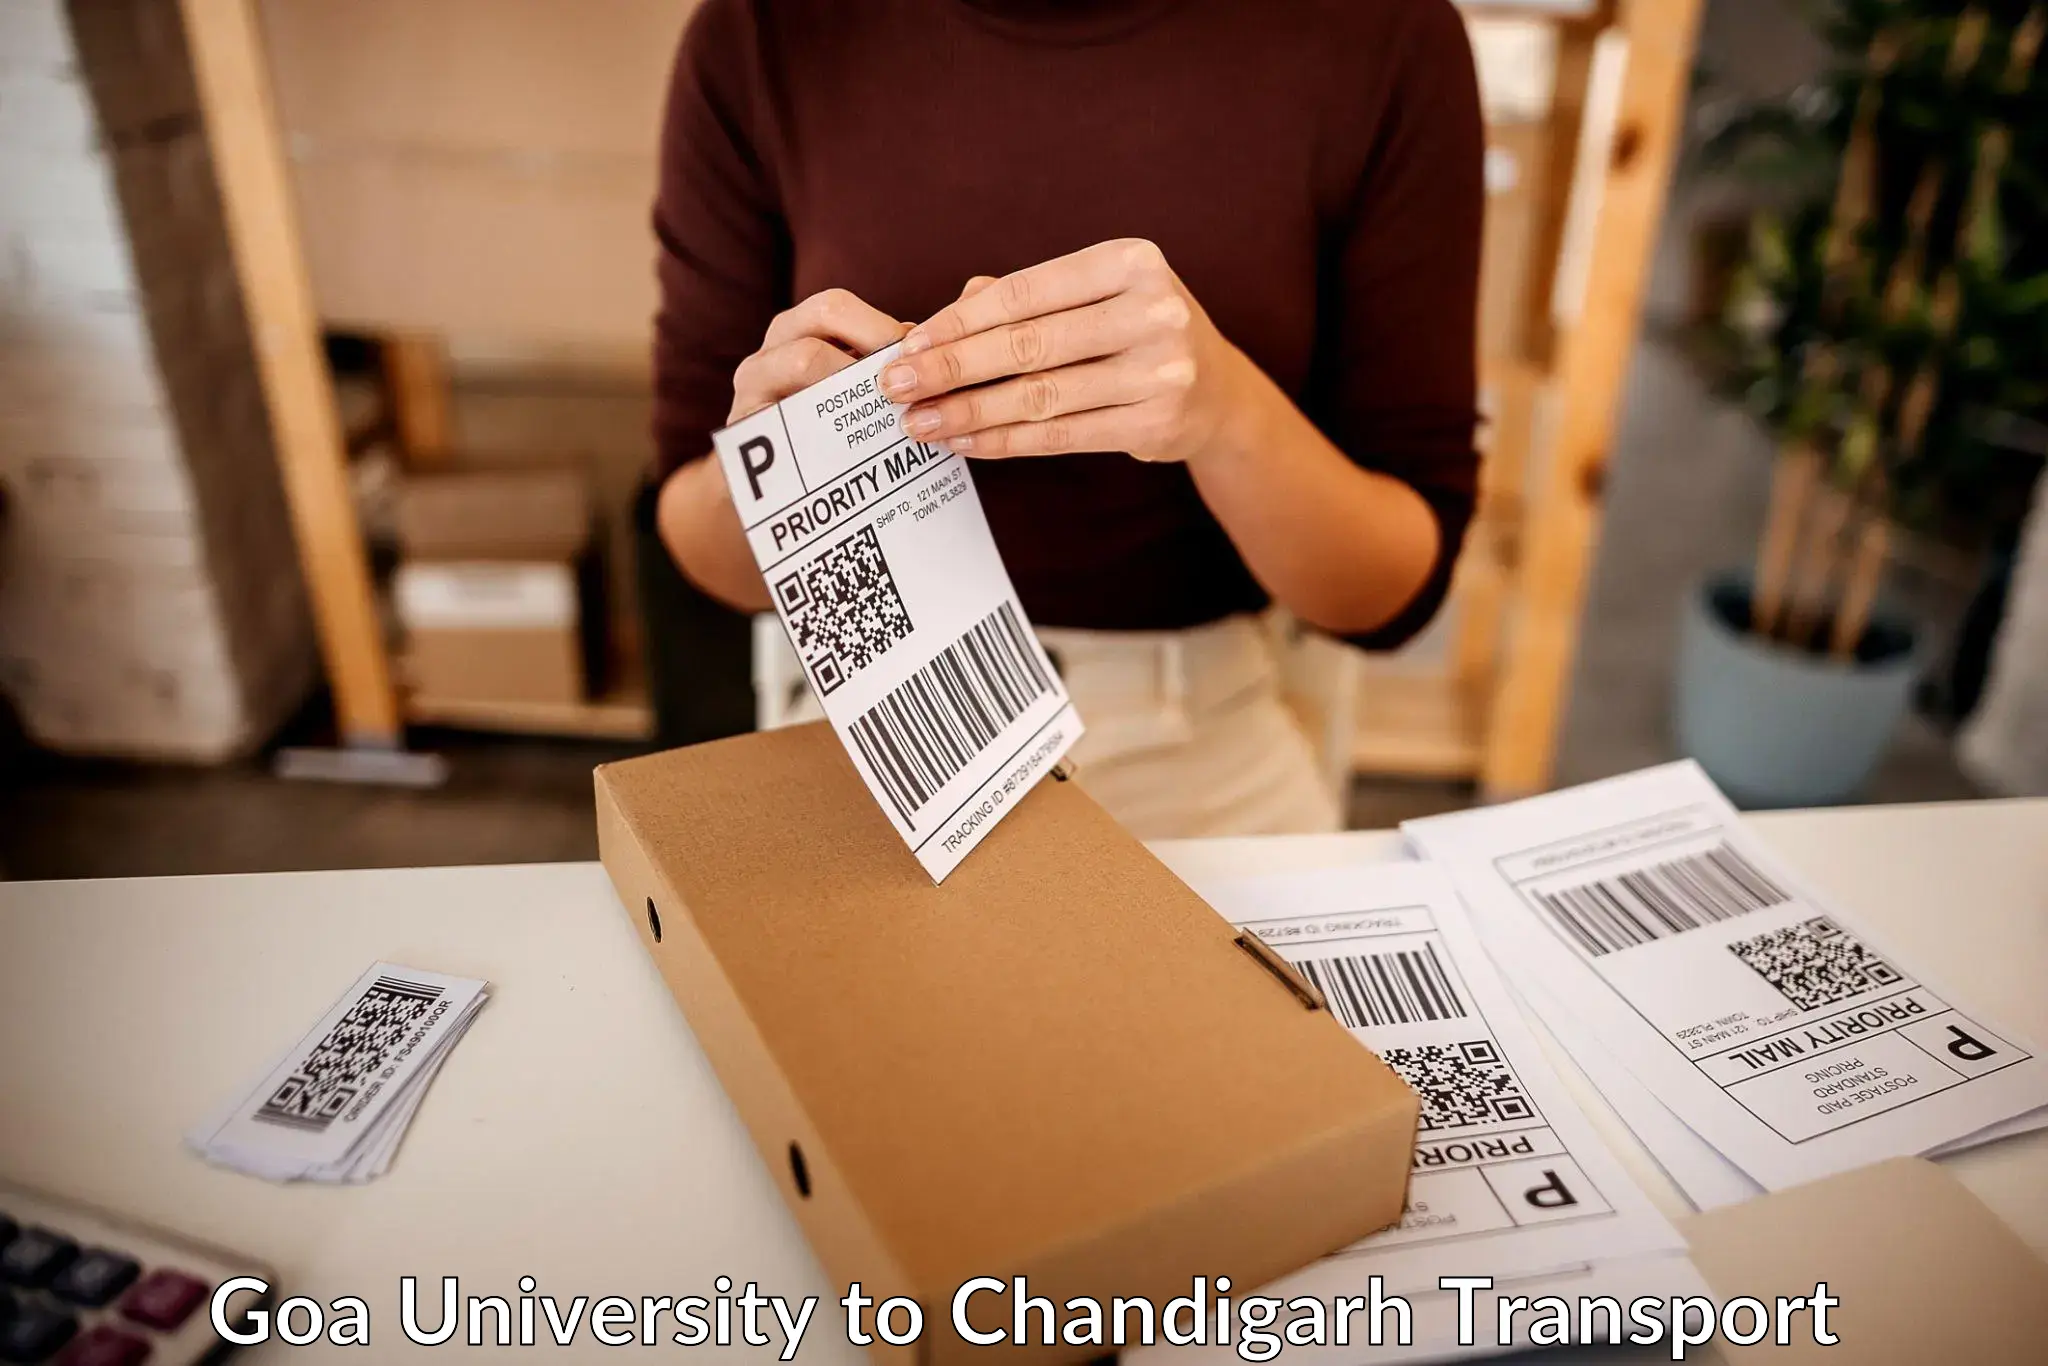 Delivery service Goa University to Chandigarh